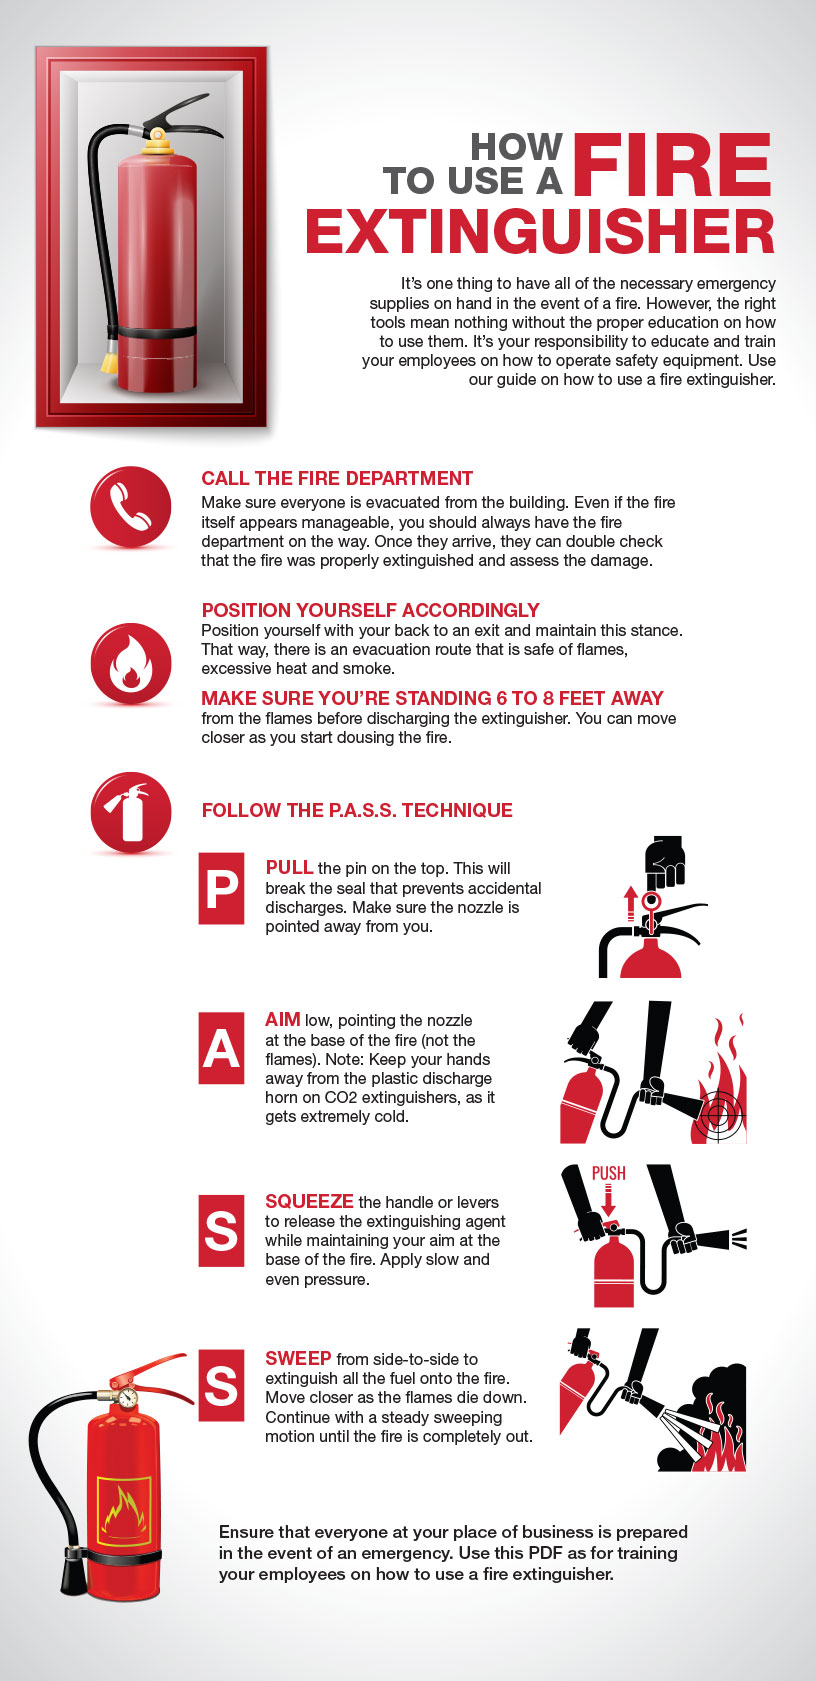 How to Use a Fire Extinguisher in the Workplace - Grainger KnowHow